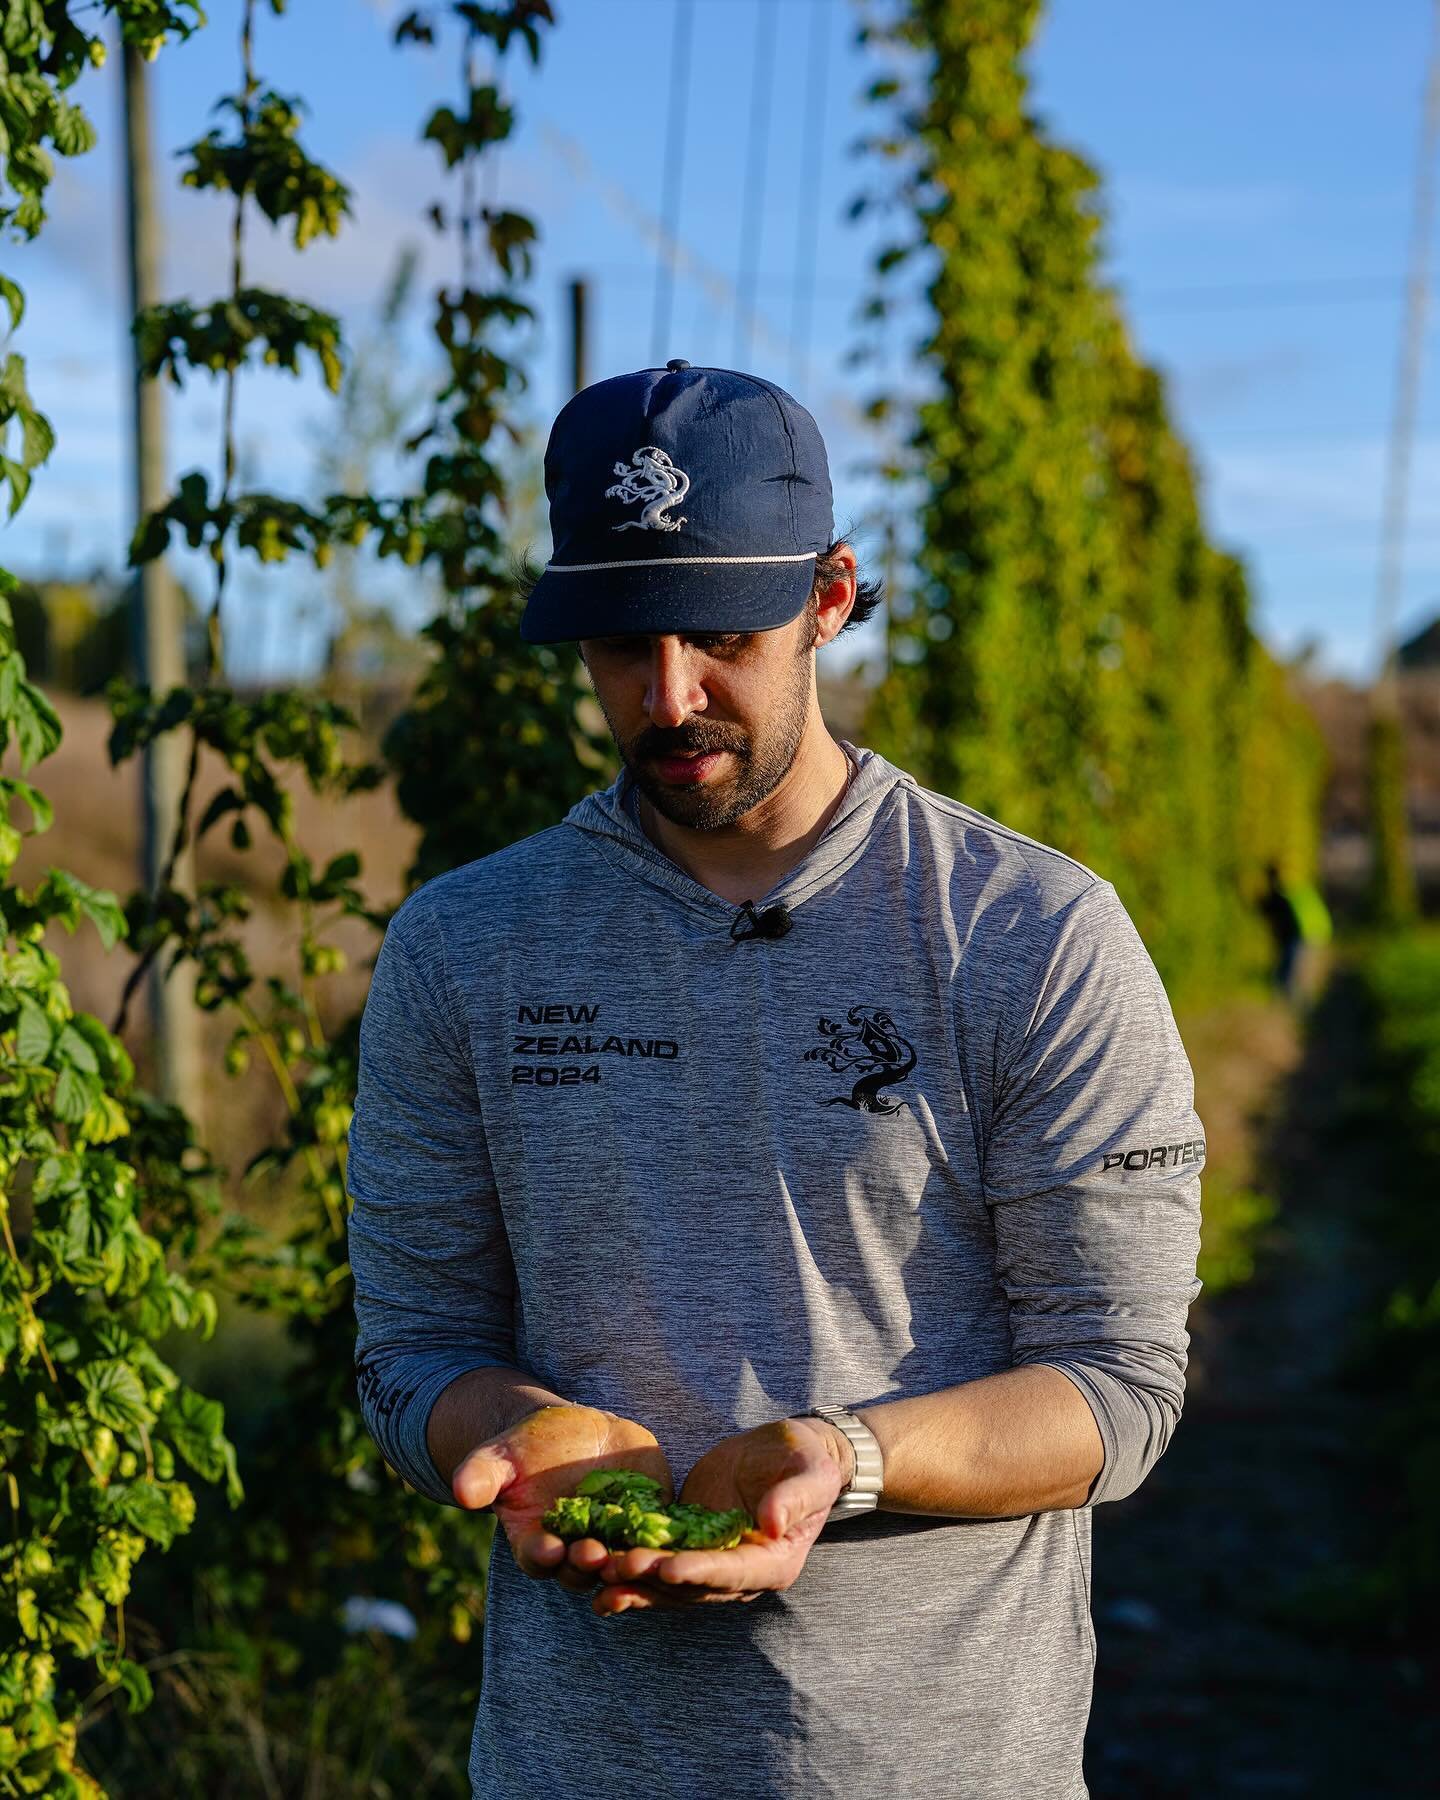 With the trip&rsquo;s energy reaching a fever pitch, we arrived @freestylehops in Upper Moutere, where Freestyle Managing Director Dave Dunbar greeted us.

Our passion for hops mirrors David&rsquo;s&mdash;he is obsessed with connecting the dots betwe